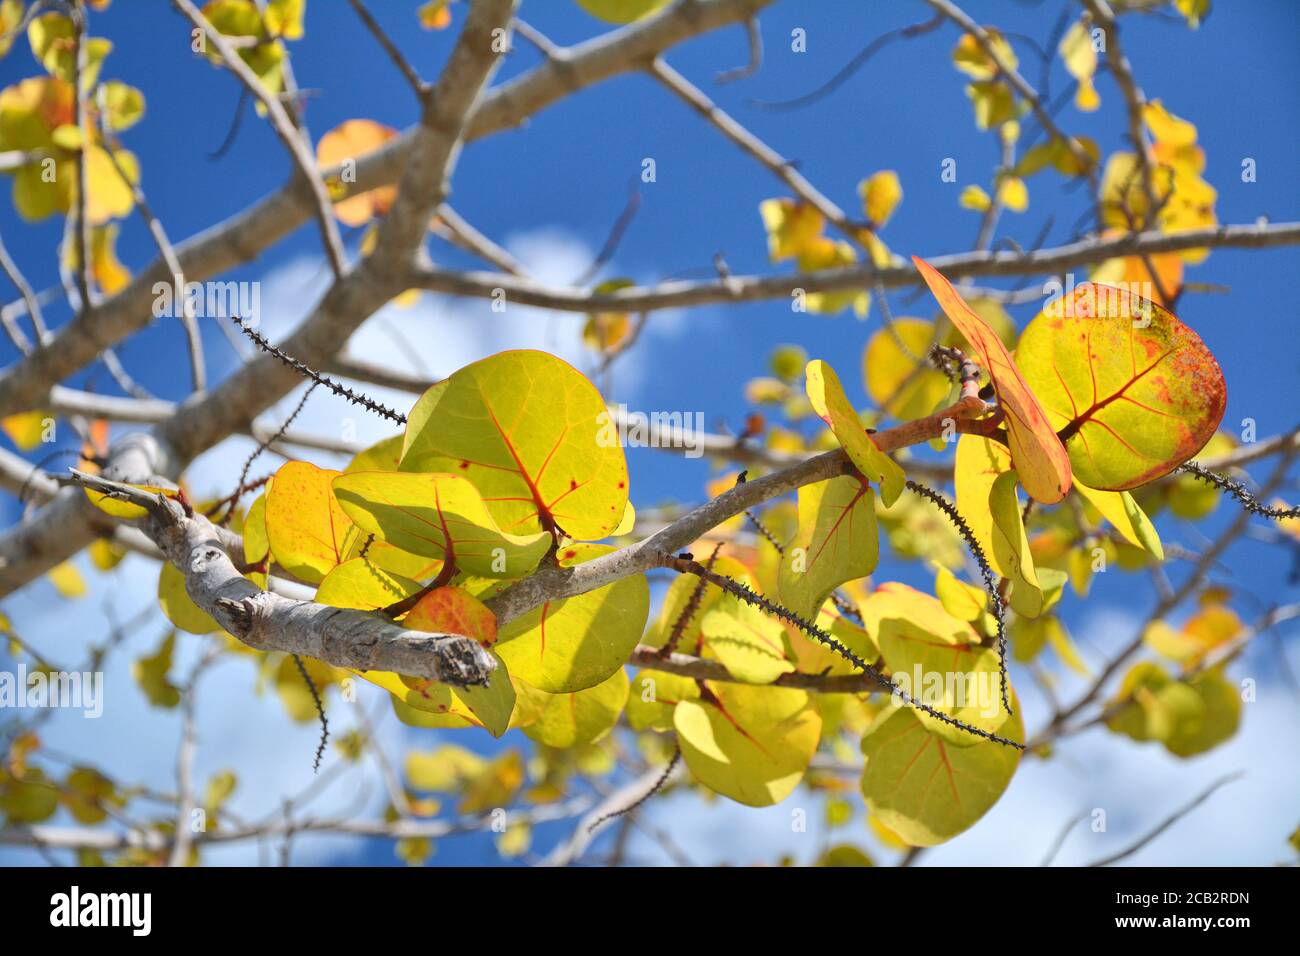 Branches with leaves of see grape tree over blue sky. Stock Photo